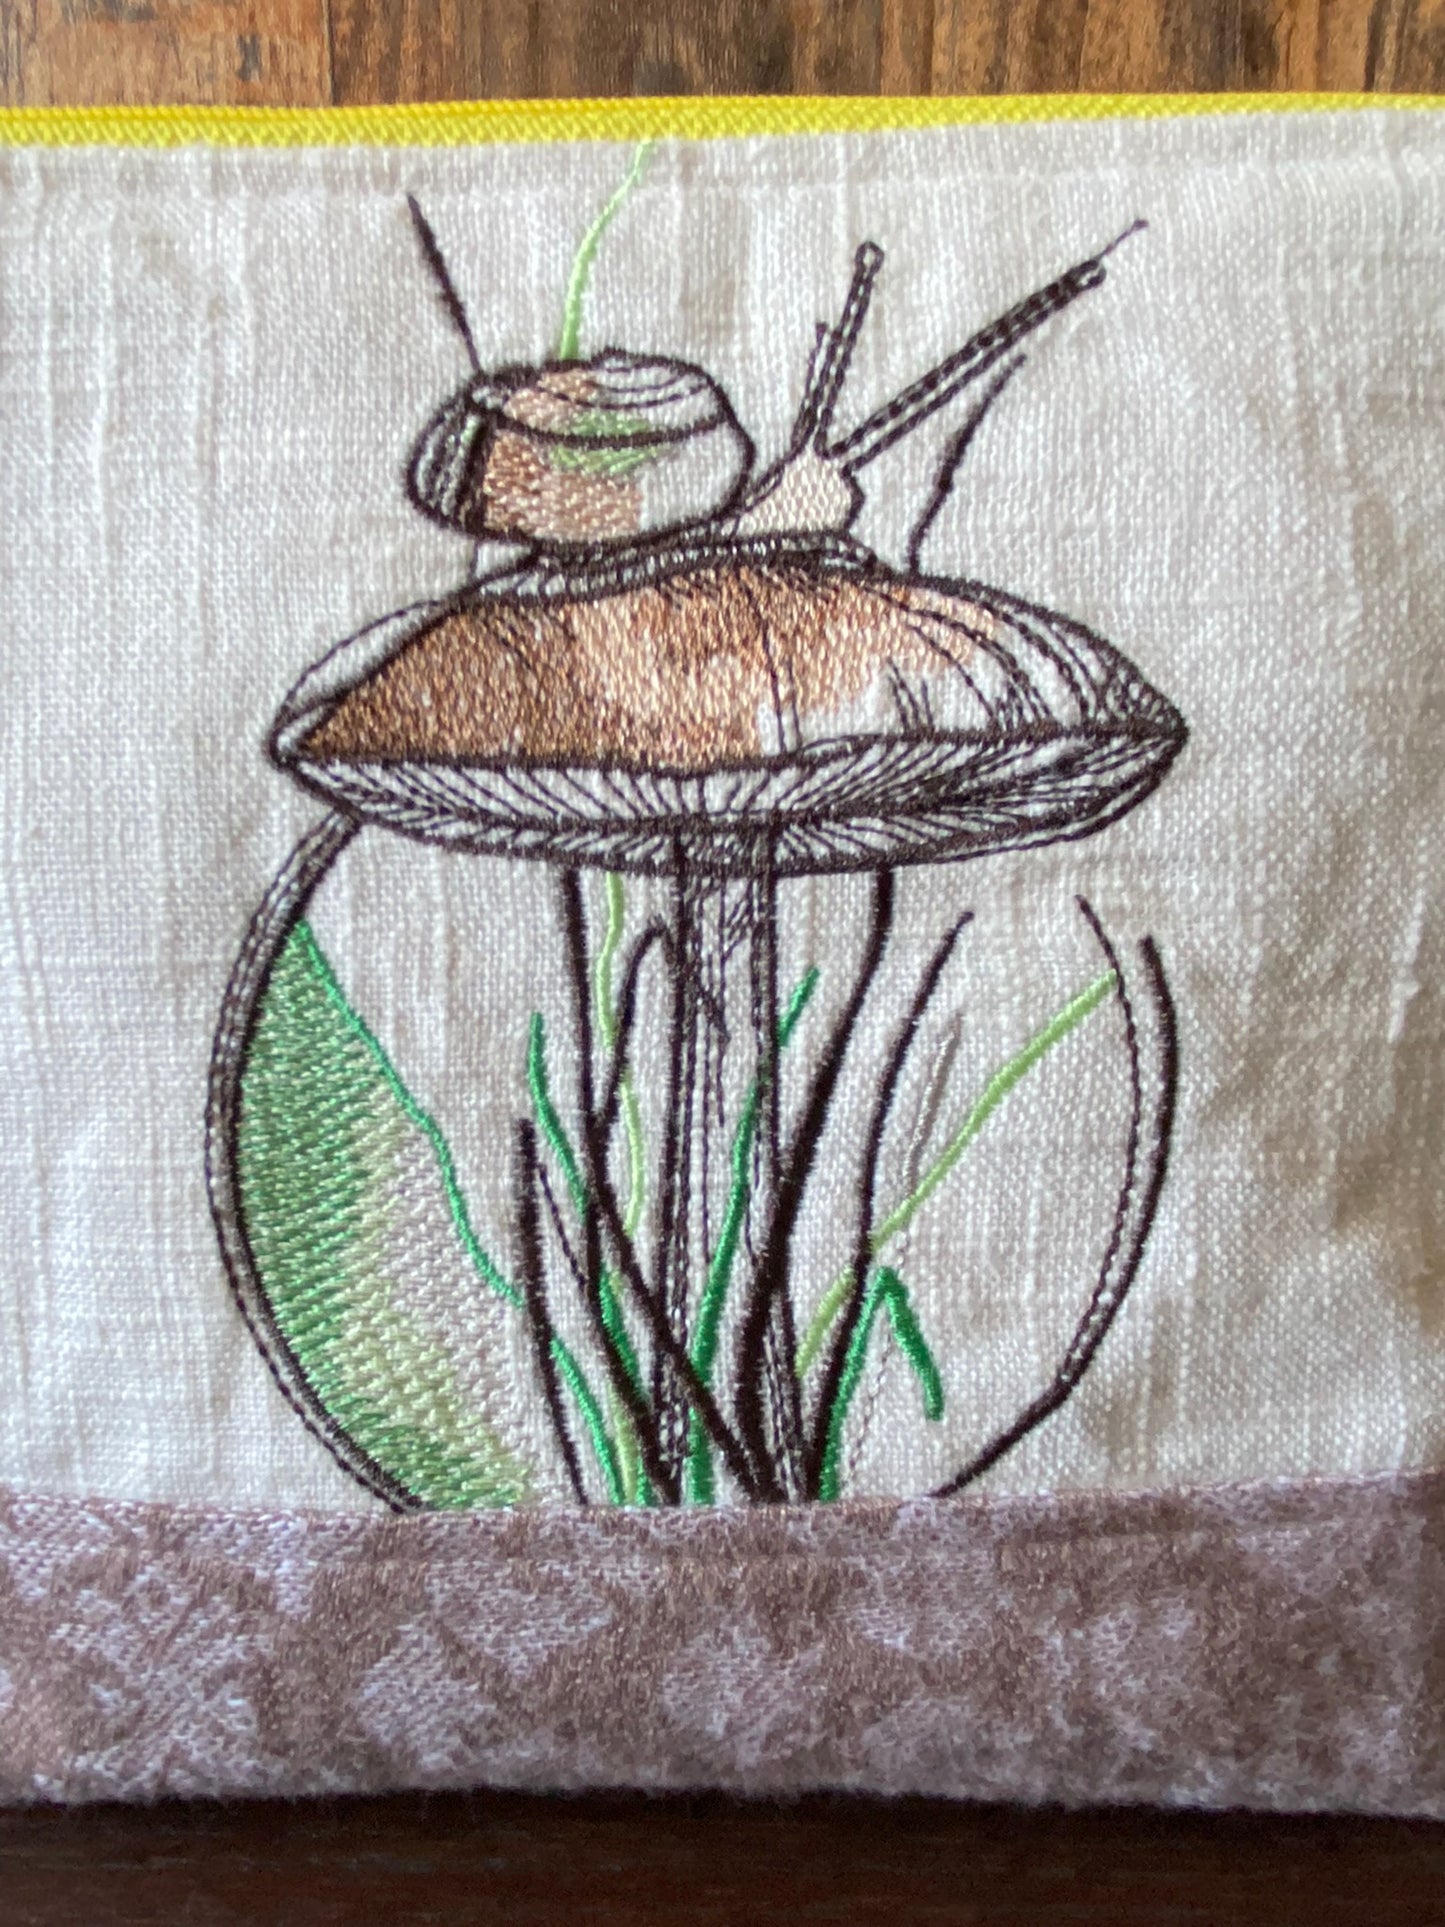 Snail and Mushrooms Padded Project or Cosmetic Bag